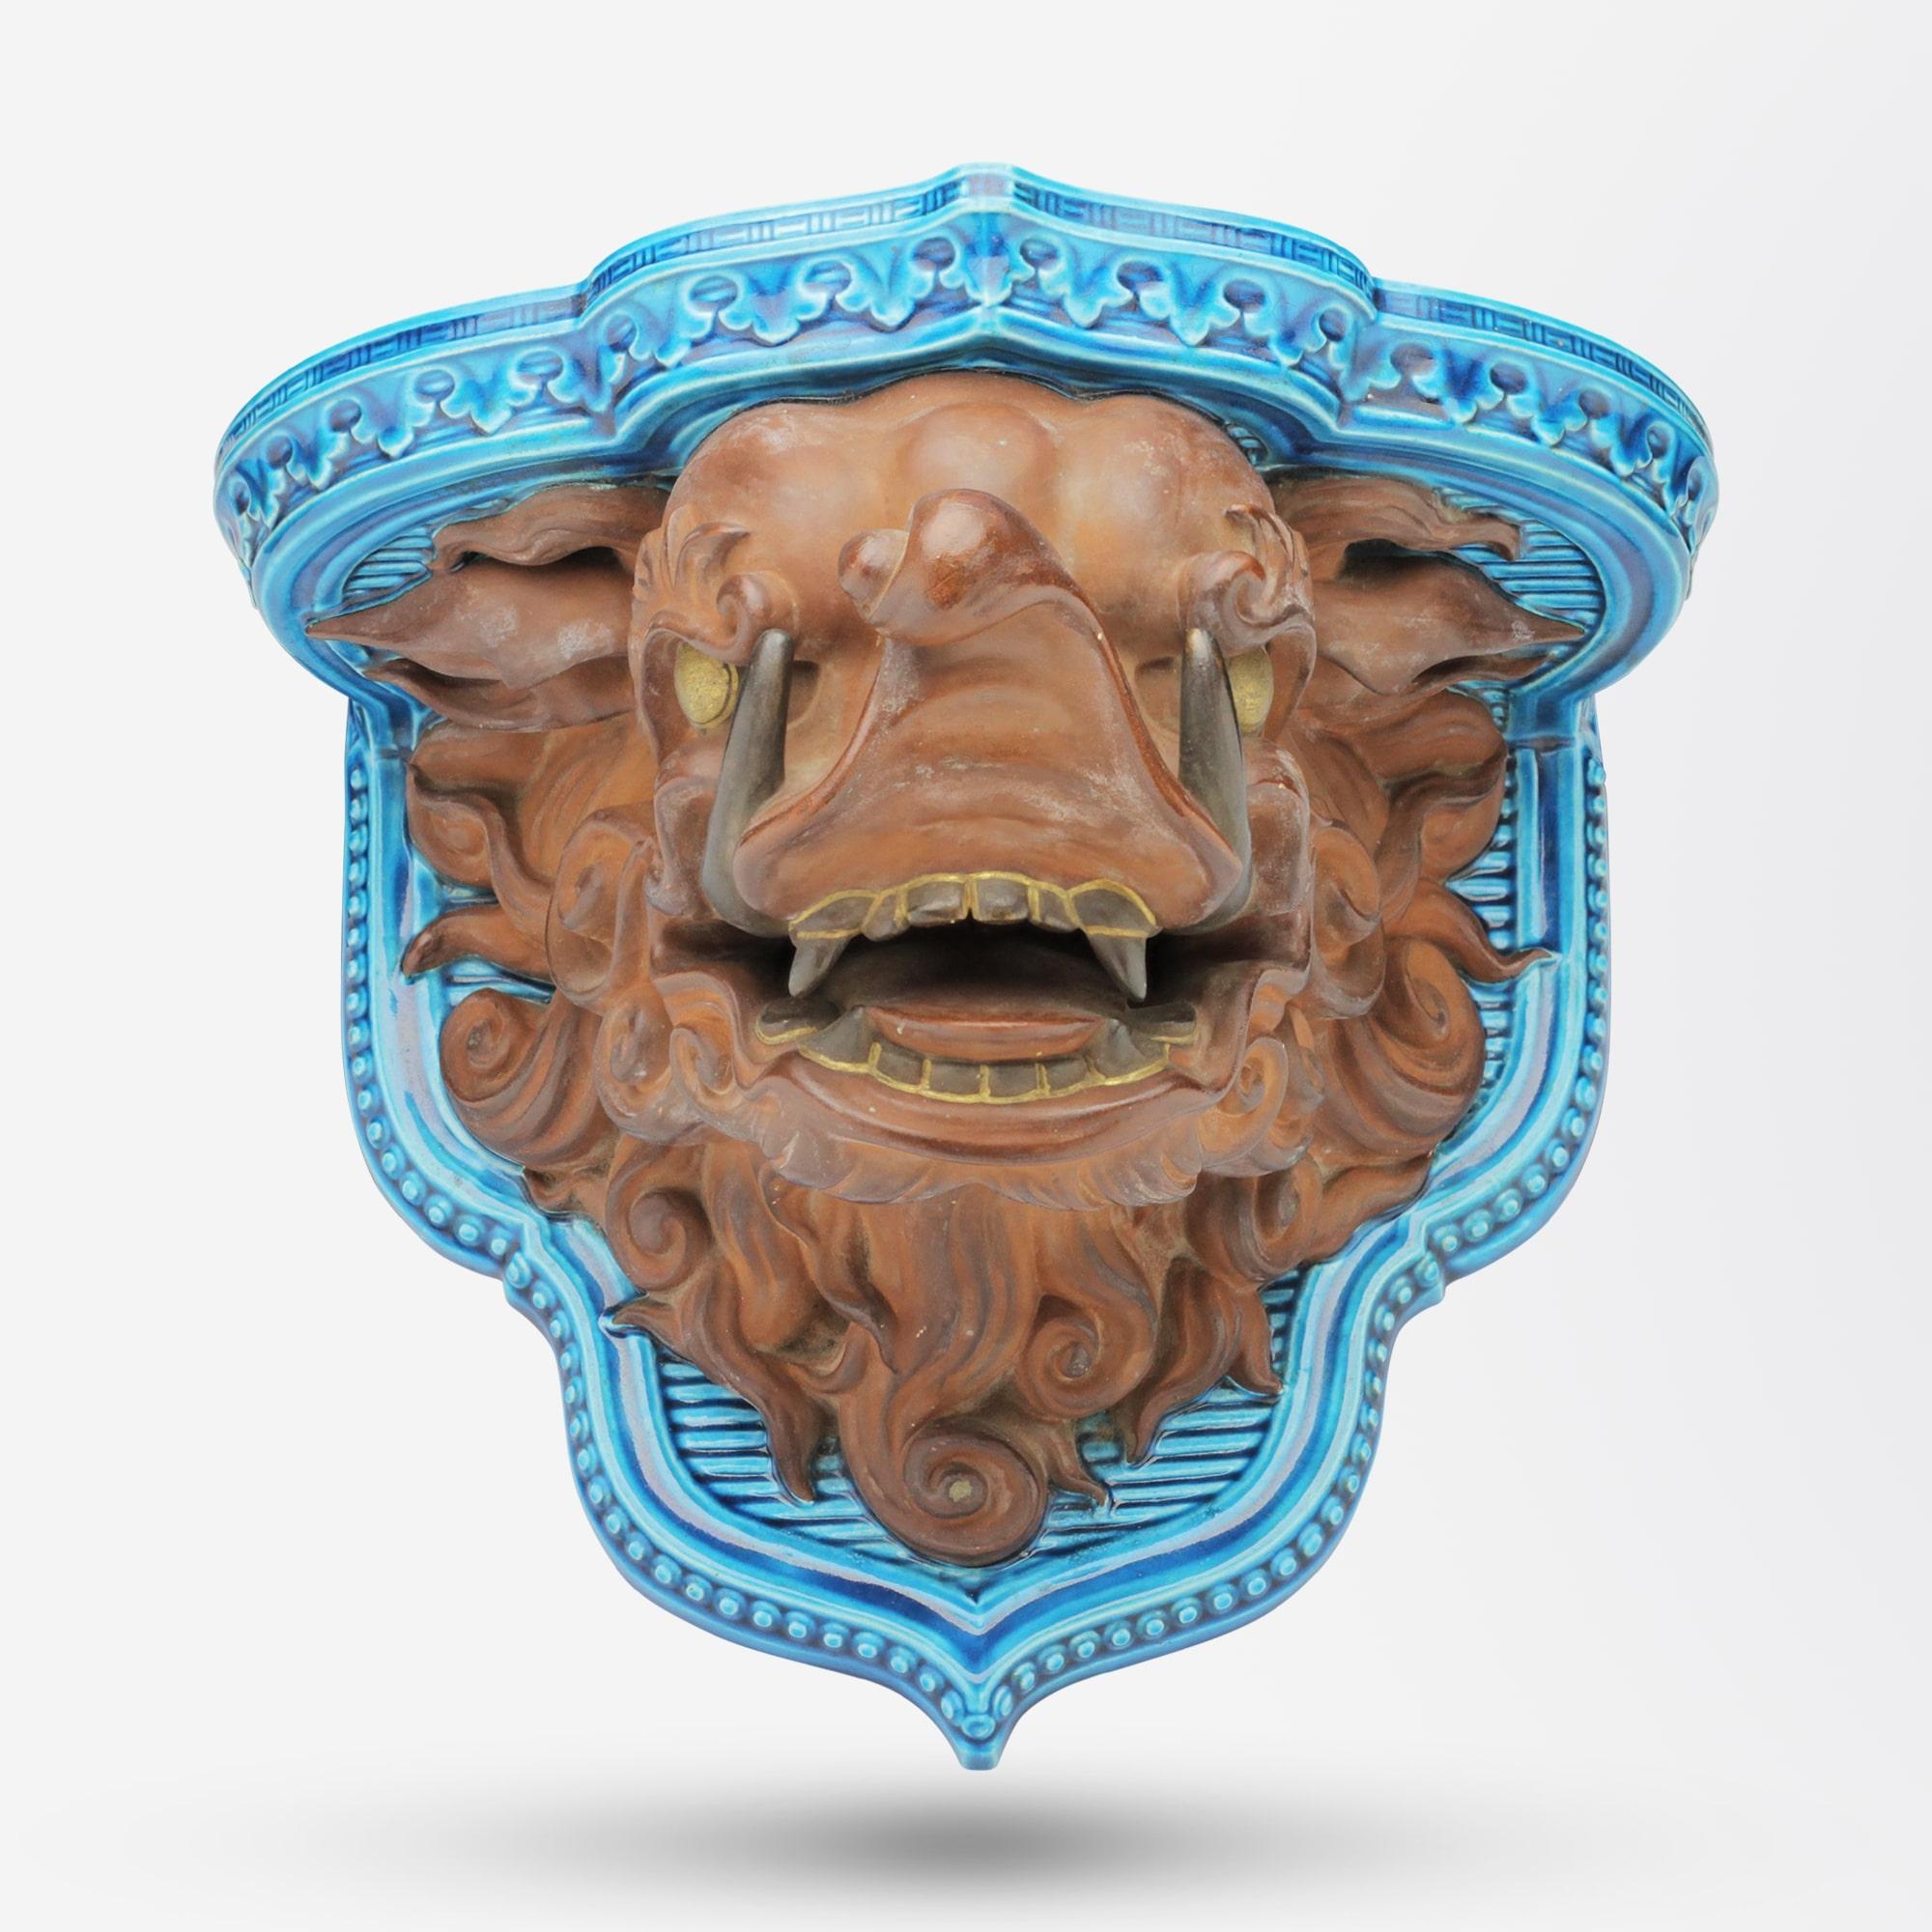 A marvellous 1870s period porcelain wall bracket by English maker Royal Worcester. The porcelain bracket has a rich turquoise ground which has been softened with a matte 'rust' glaze to the Buddhistic lion head and features small highlights of gold